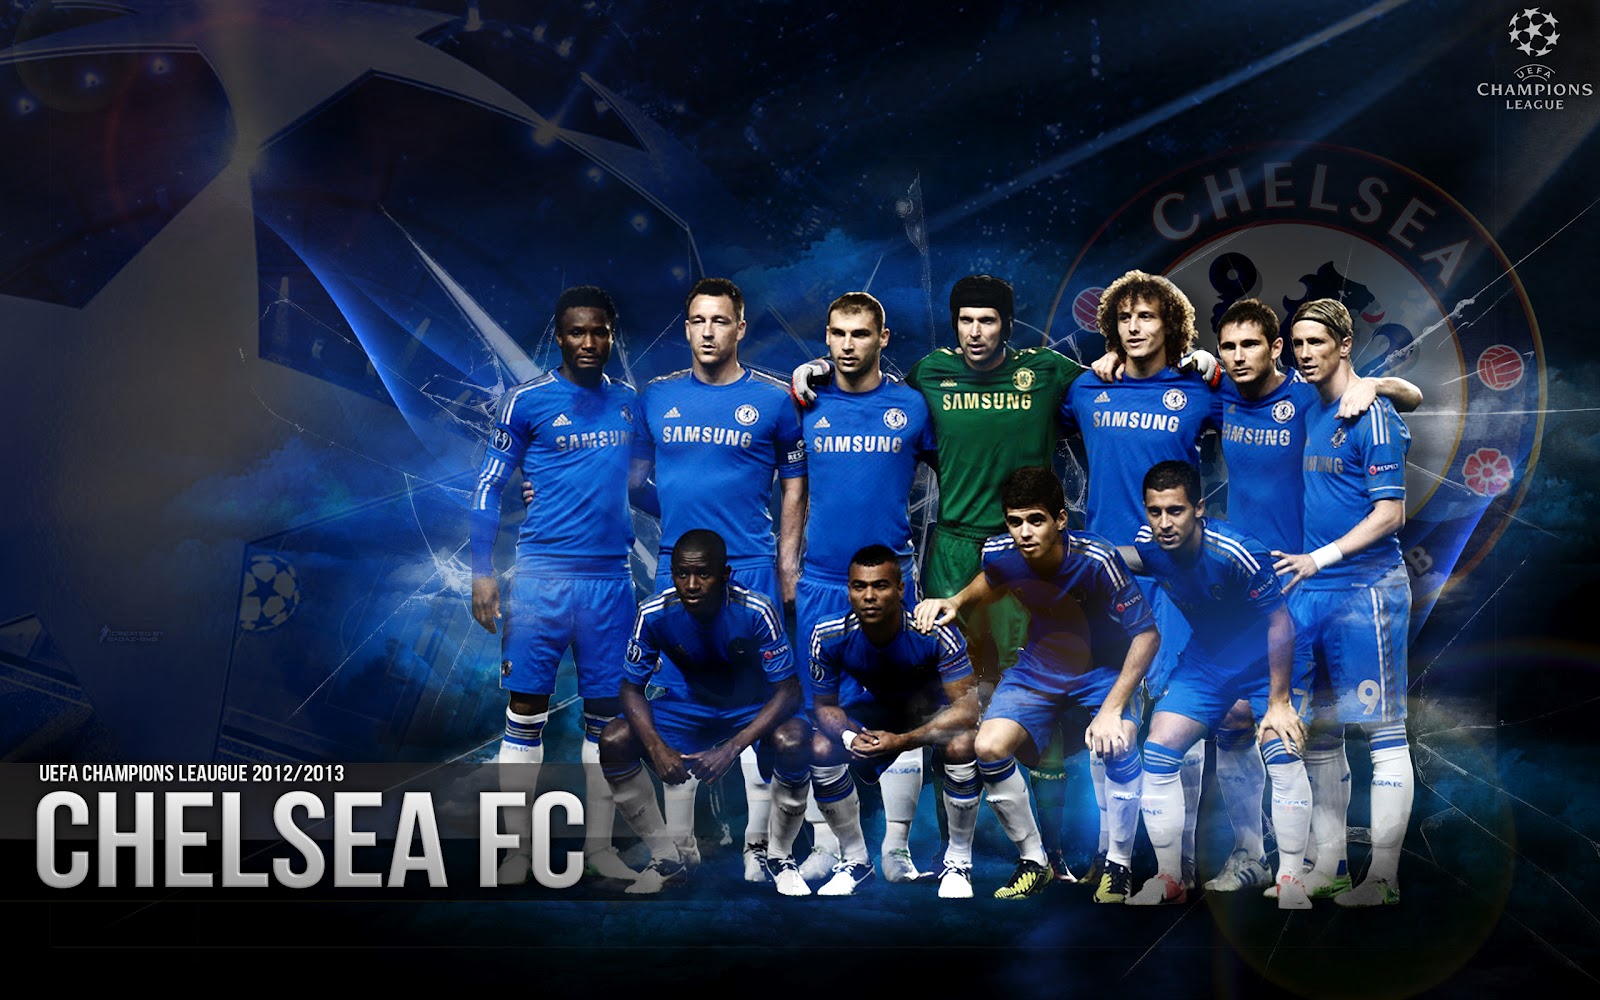 Free Download Wallpaper Chelsea Fc Players 2015 Download Wallpaper Chelsea Fc 1600x1000 For Your Desktop Mobile Tablet Explore 49 Chelsea Fc Wallpaper 2015 15 Chelsea Fc Wallpapers Liverpool Fc Wallpaper 2015 Chelsea Wallpapers 2015